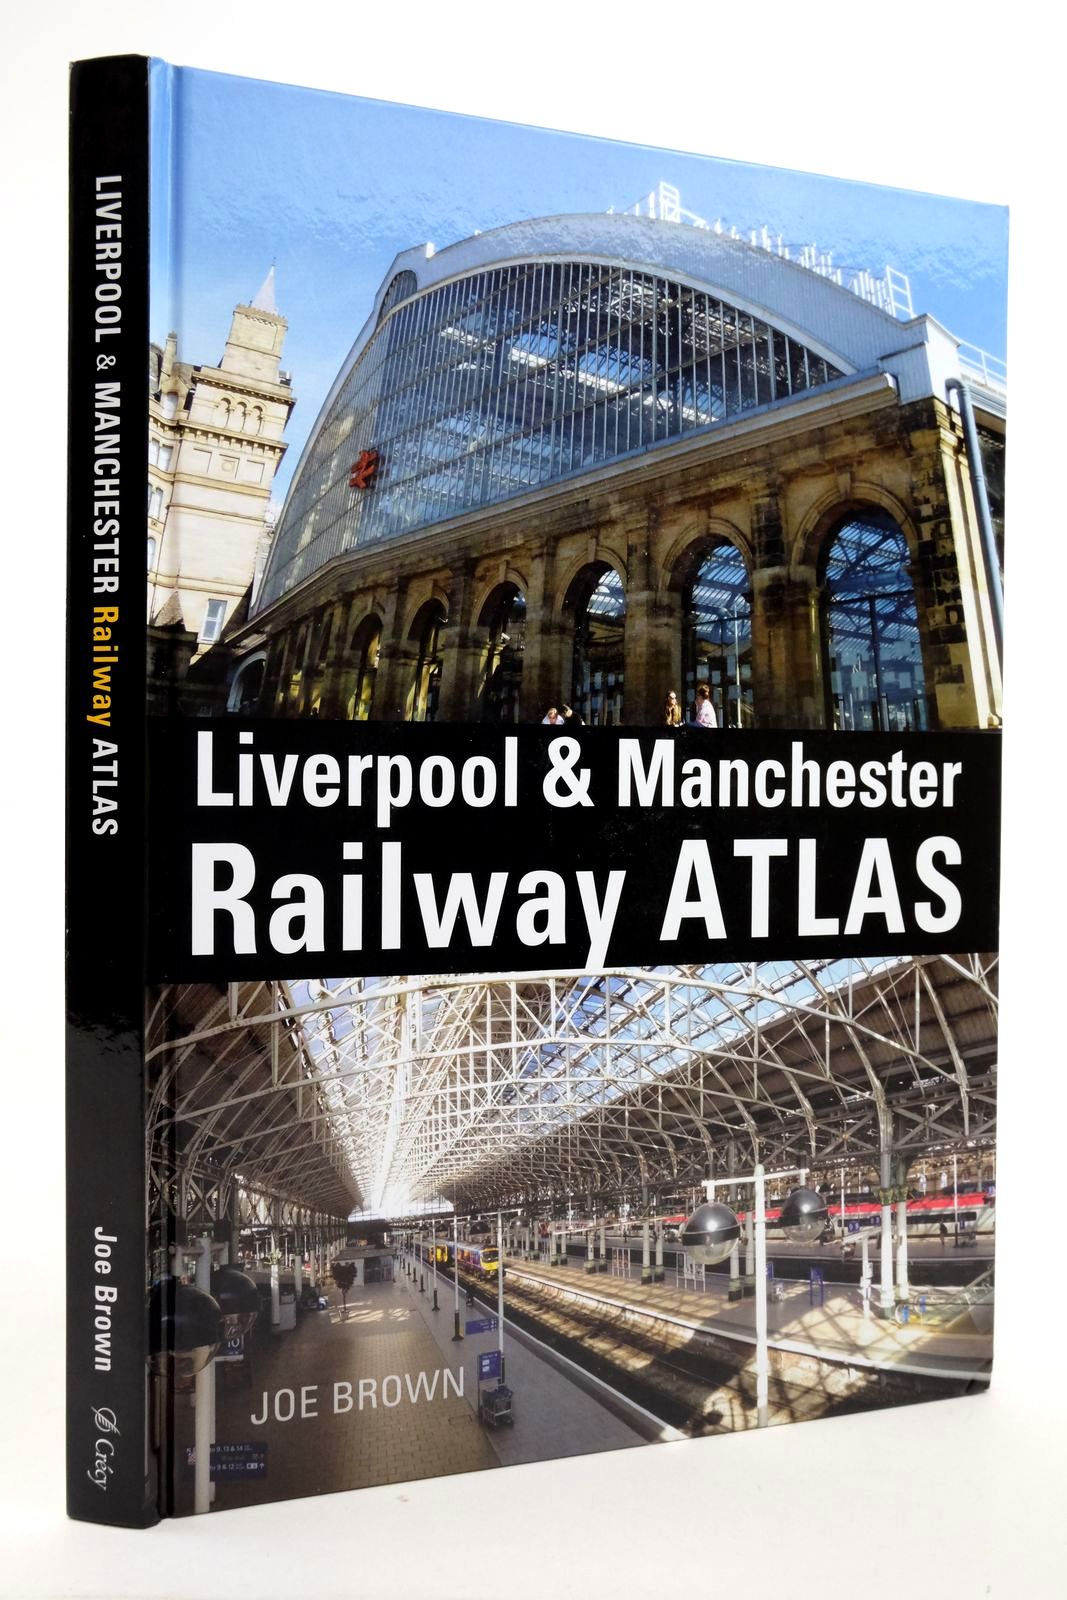 Photo of LIVERPOOL & MANCHESTER RAILWAY ATLAS written by Brown, Joe published by Crecy Publishing Limited (STOCK CODE: 2136671)  for sale by Stella & Rose's Books